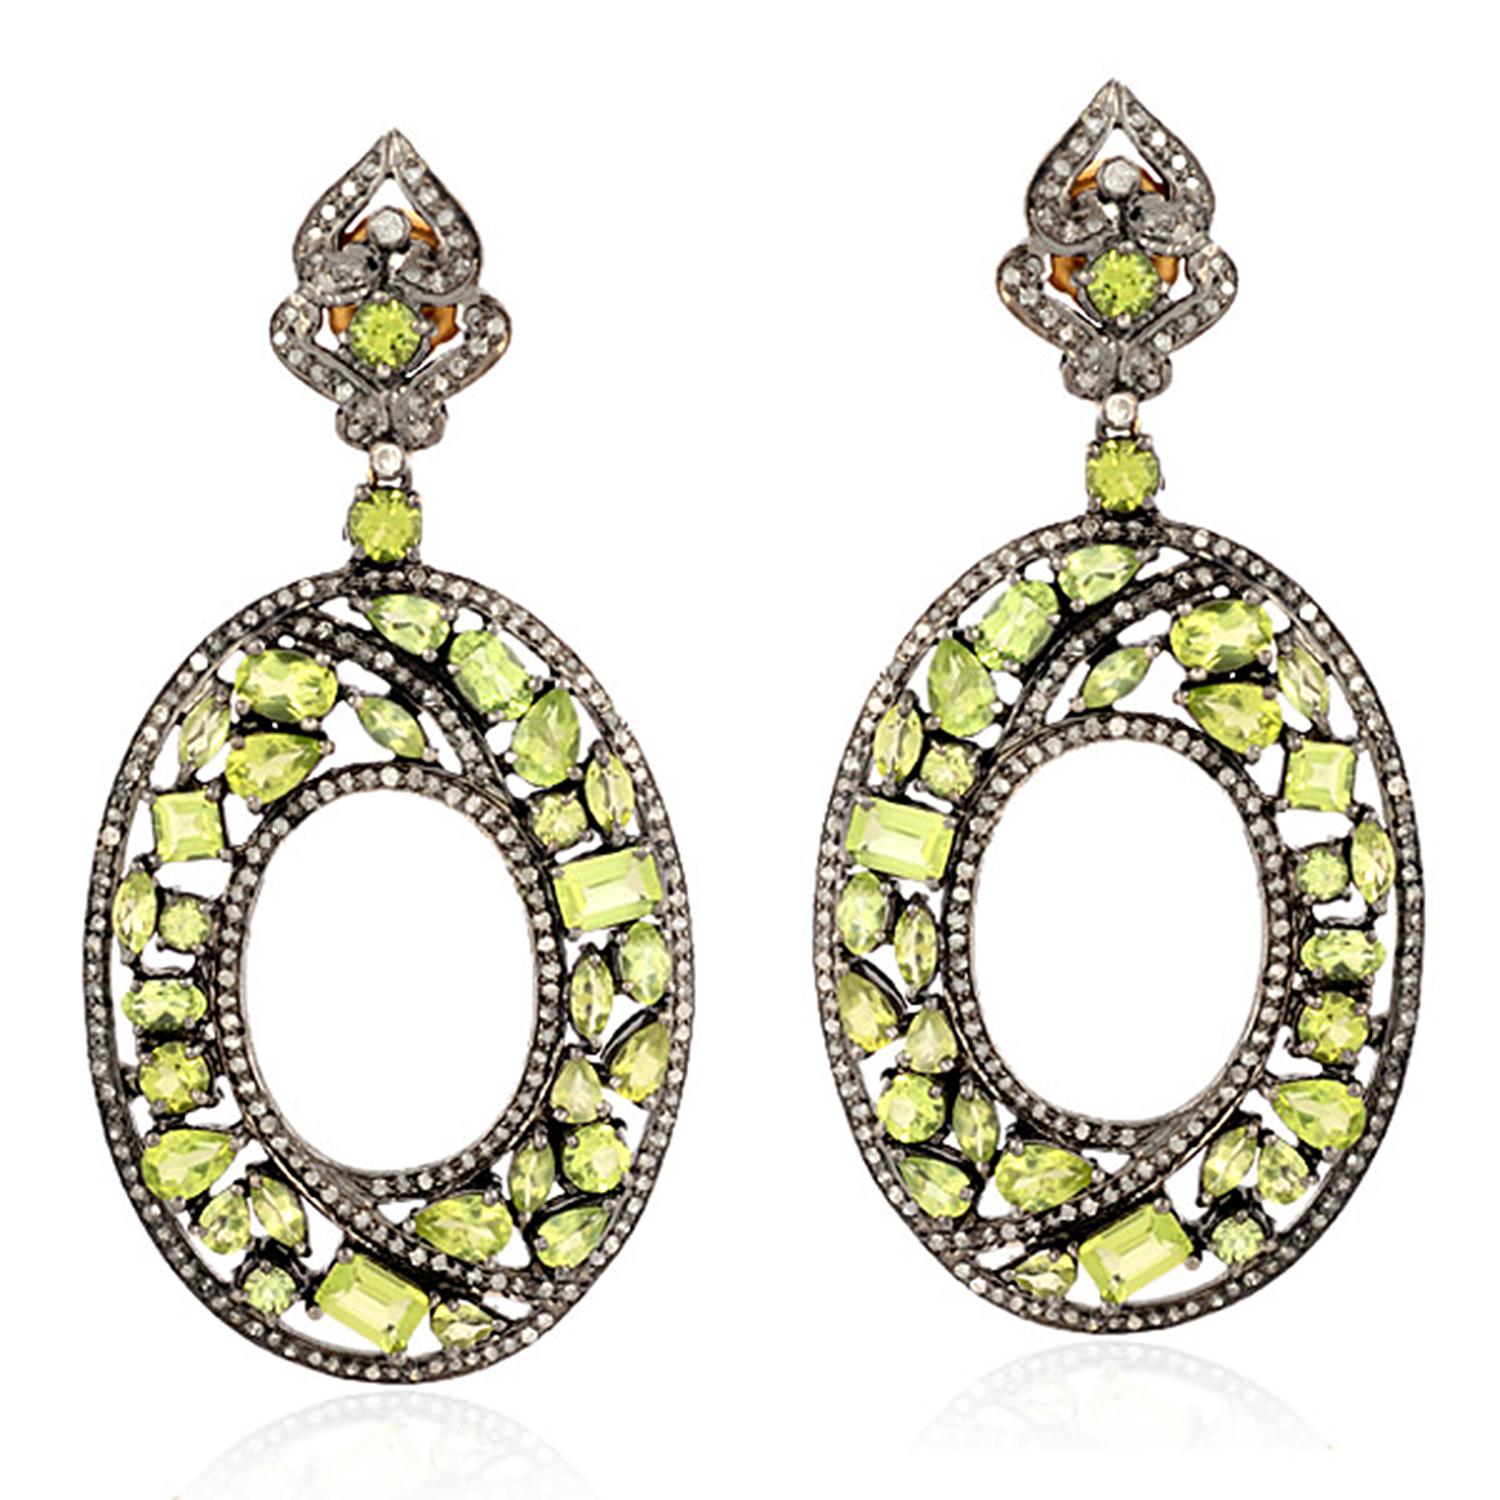 Contemporary Mixed Shaped Peridot Earrings with Diamonds Made in 18k Yellow Gold & Silver For Sale